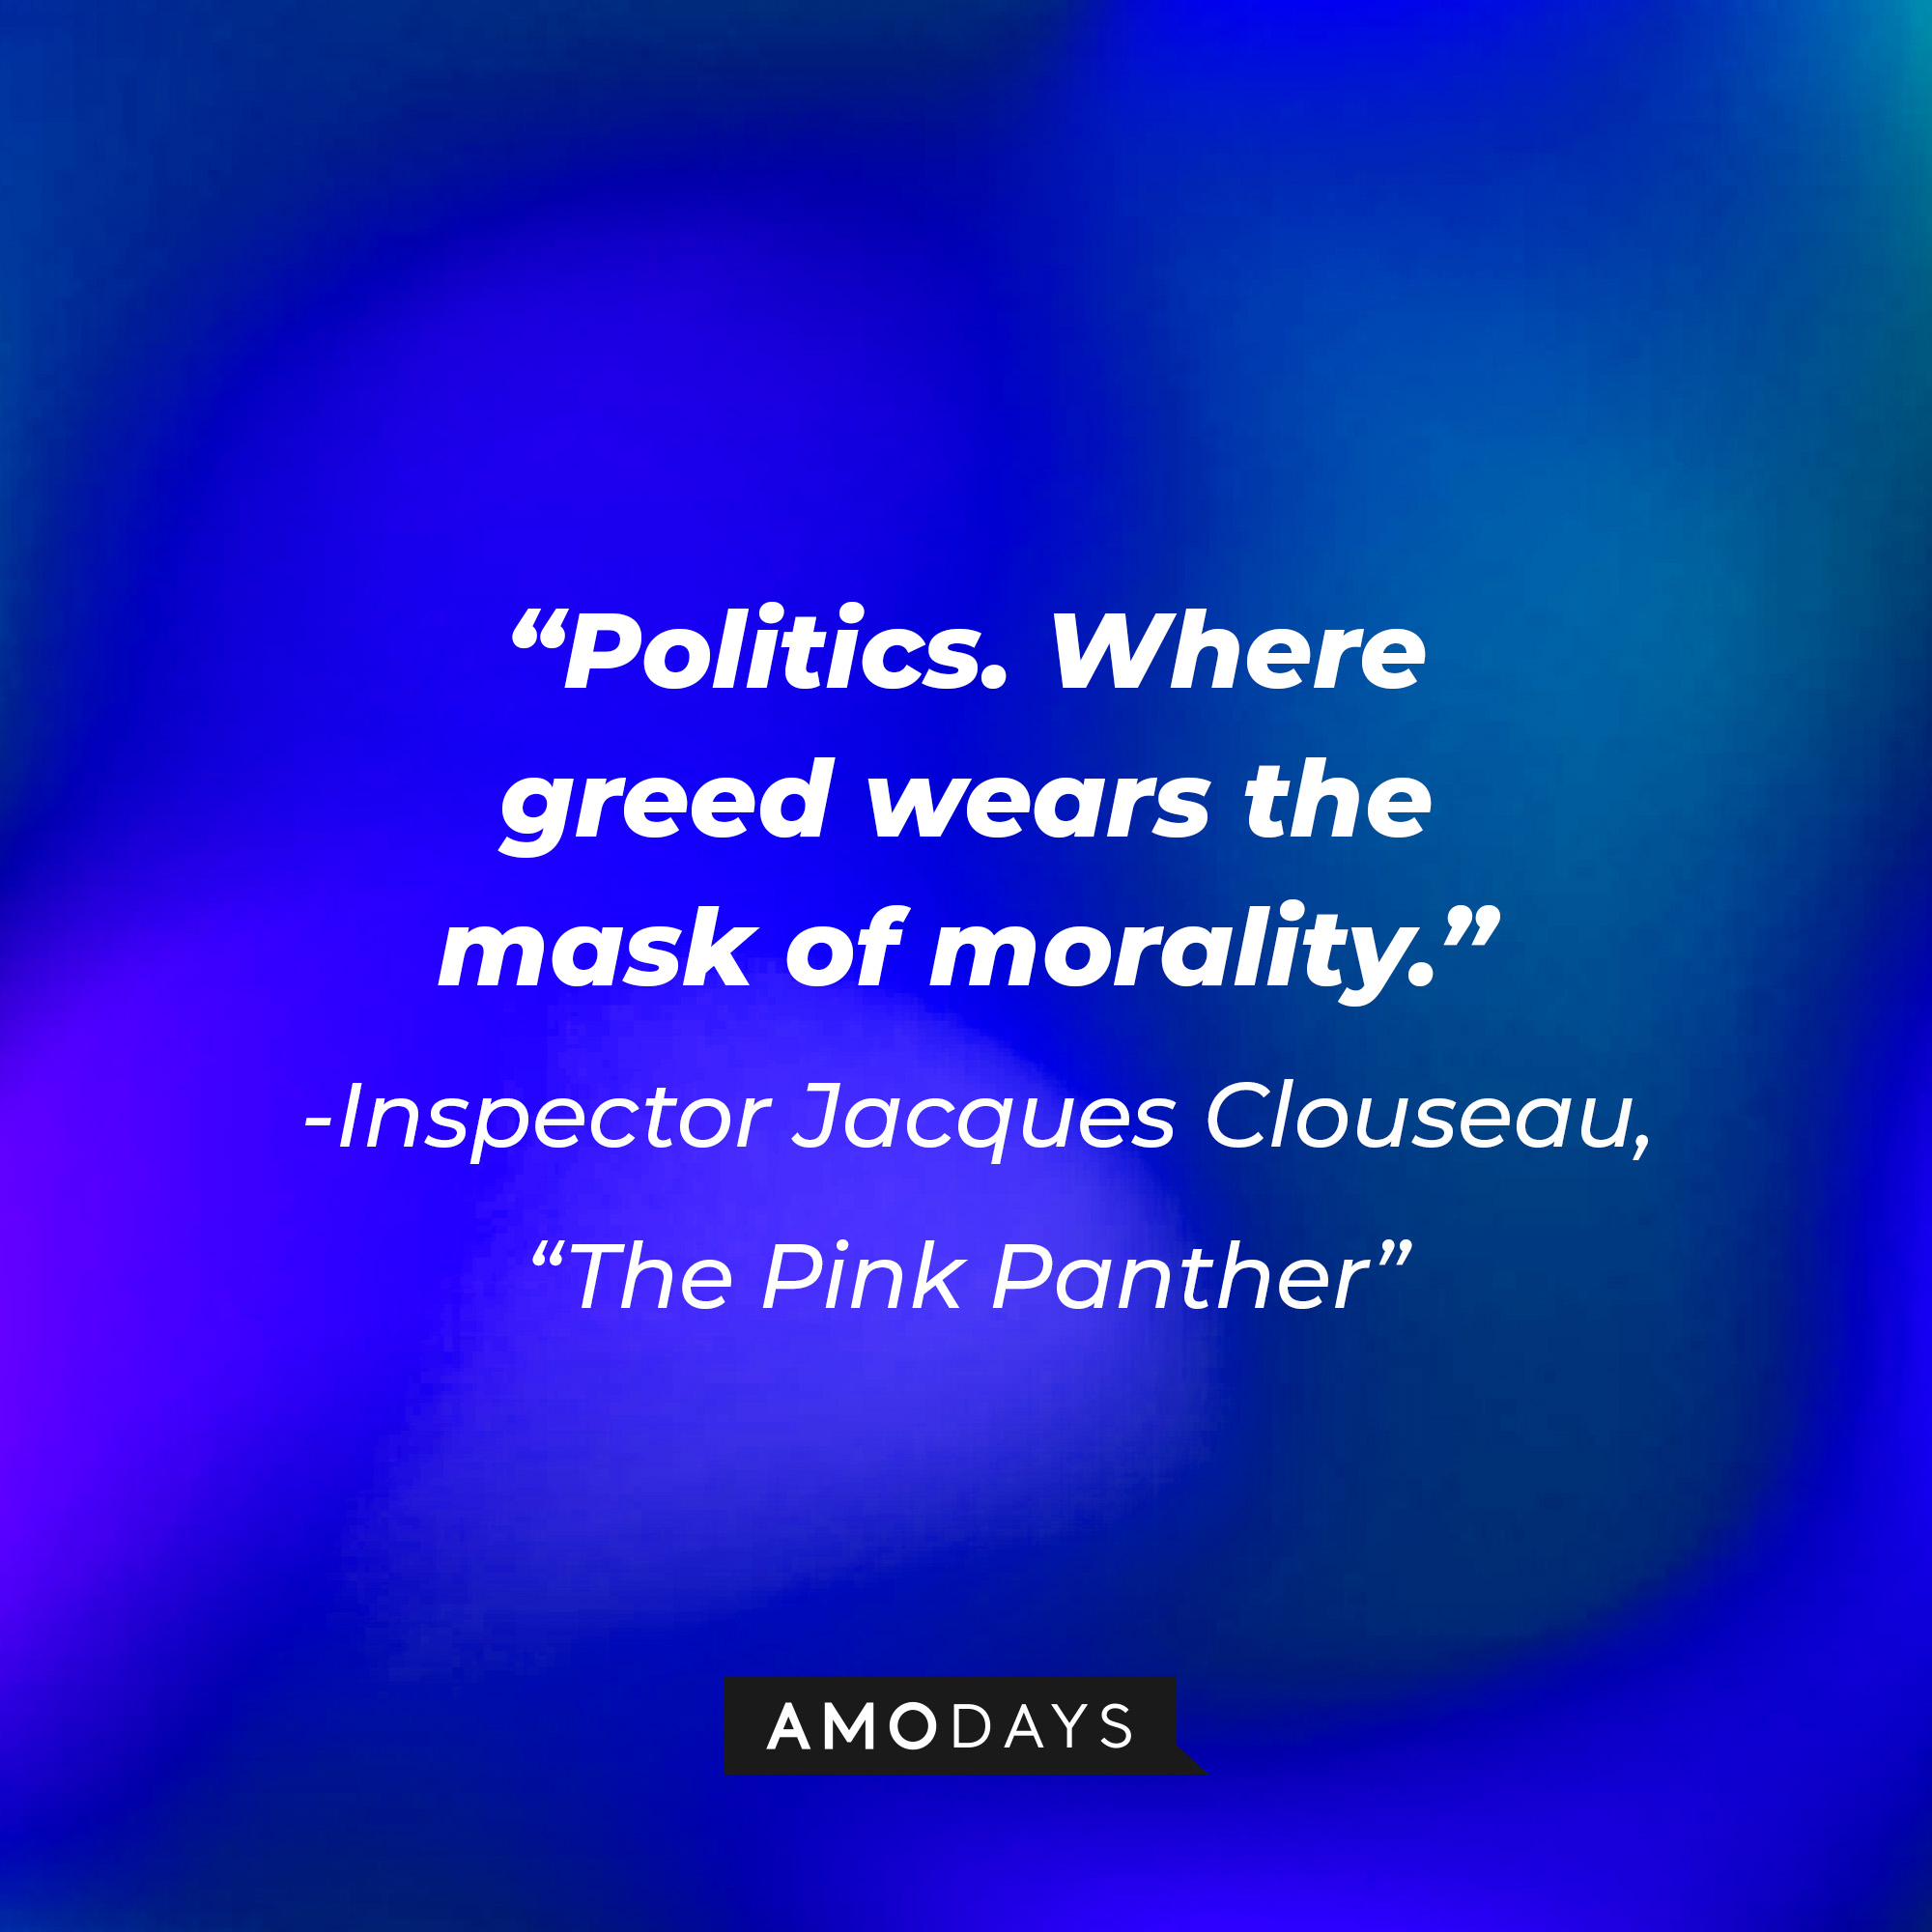 Inspector Jacques Clouseau's quote: “Politics. Where greed wears the mask of morality.” | Source: Youtube.com/sonypictures